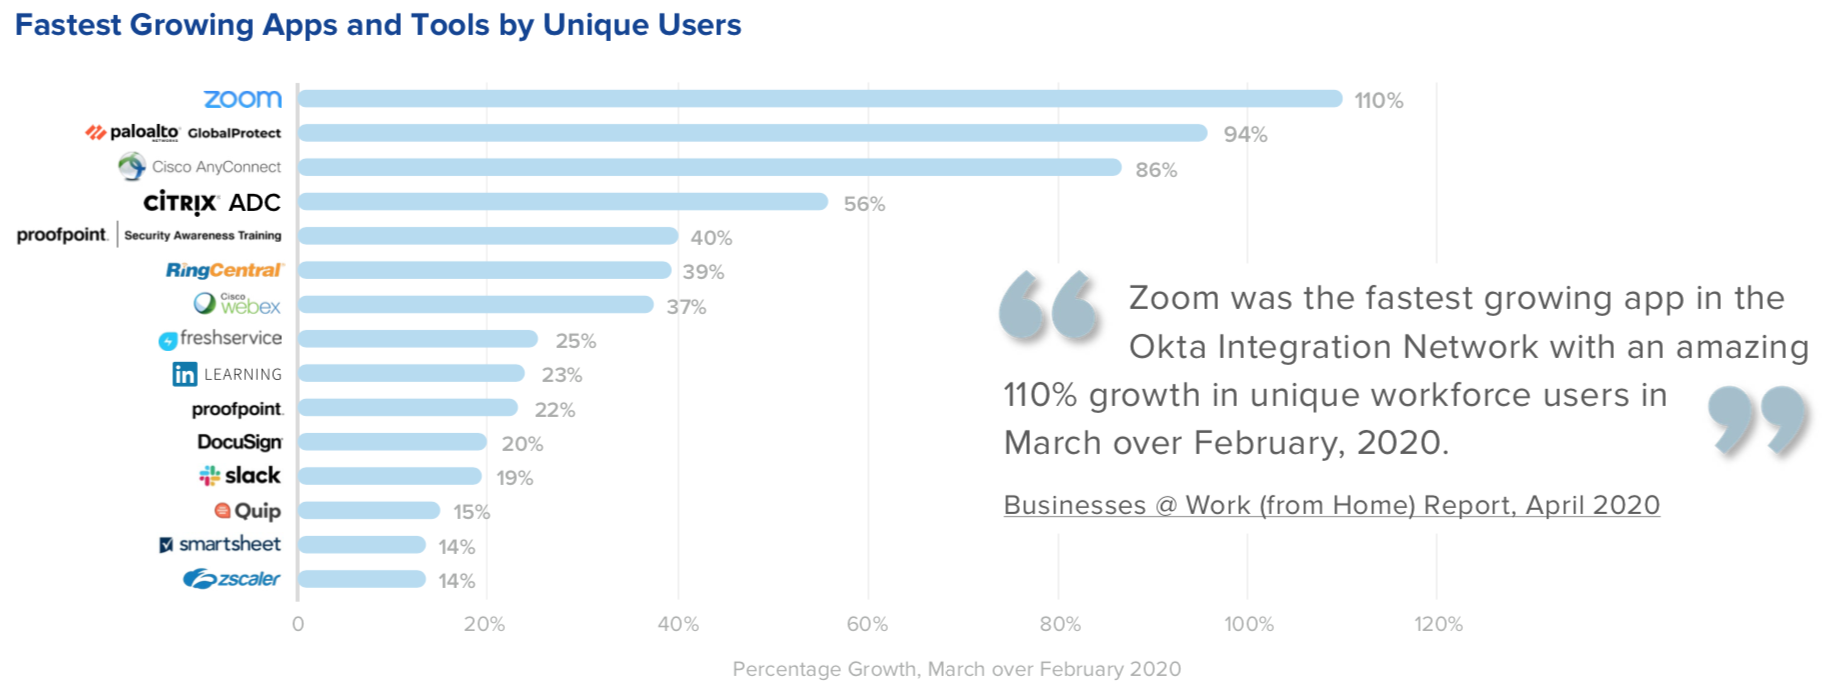 Fastest Growing Apps and Tools